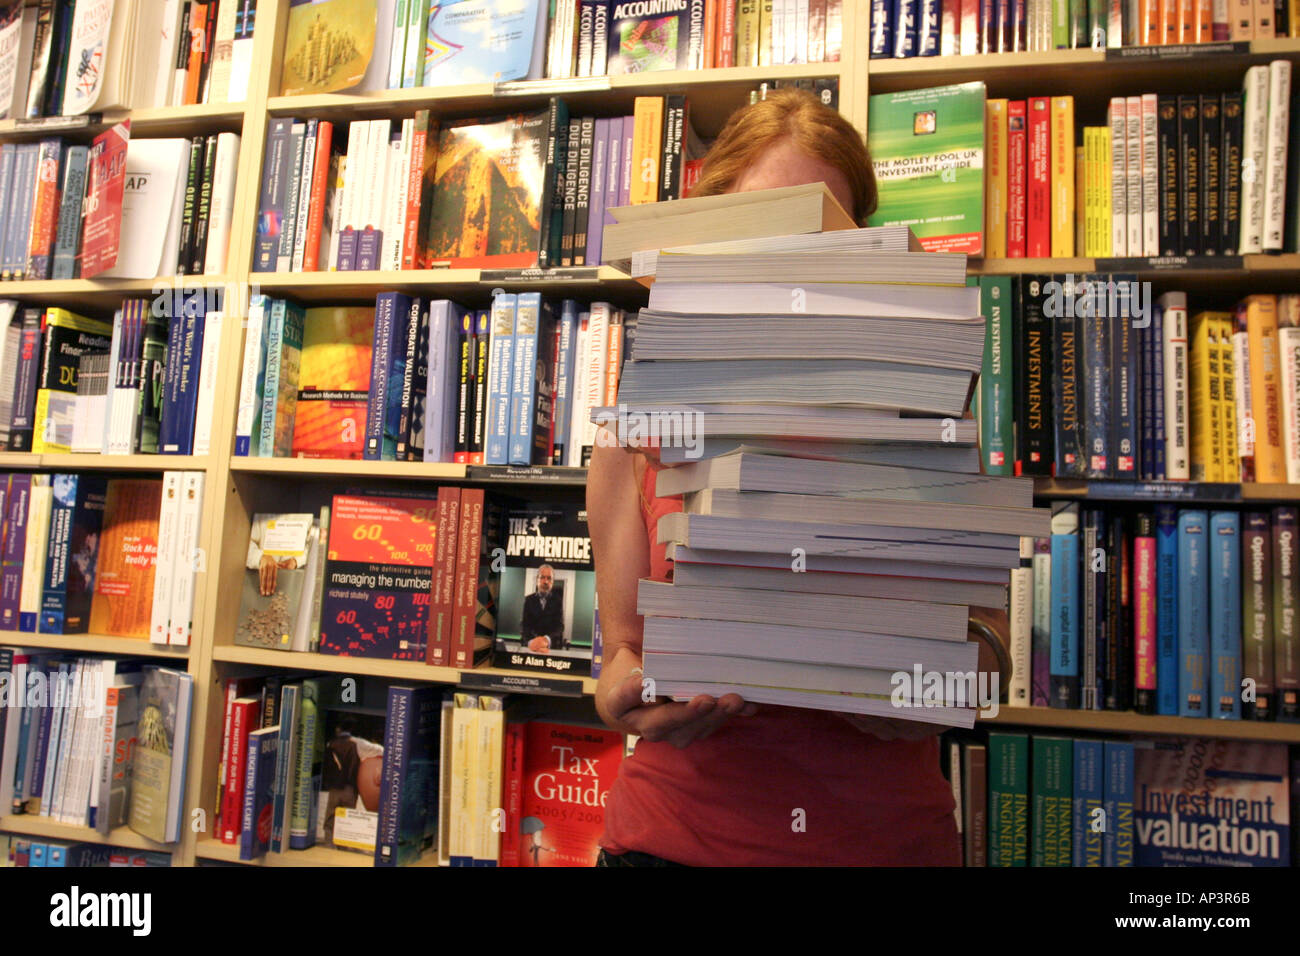 A Girl Holding A Large Pile Of Books In In Front Of A Bookshelf